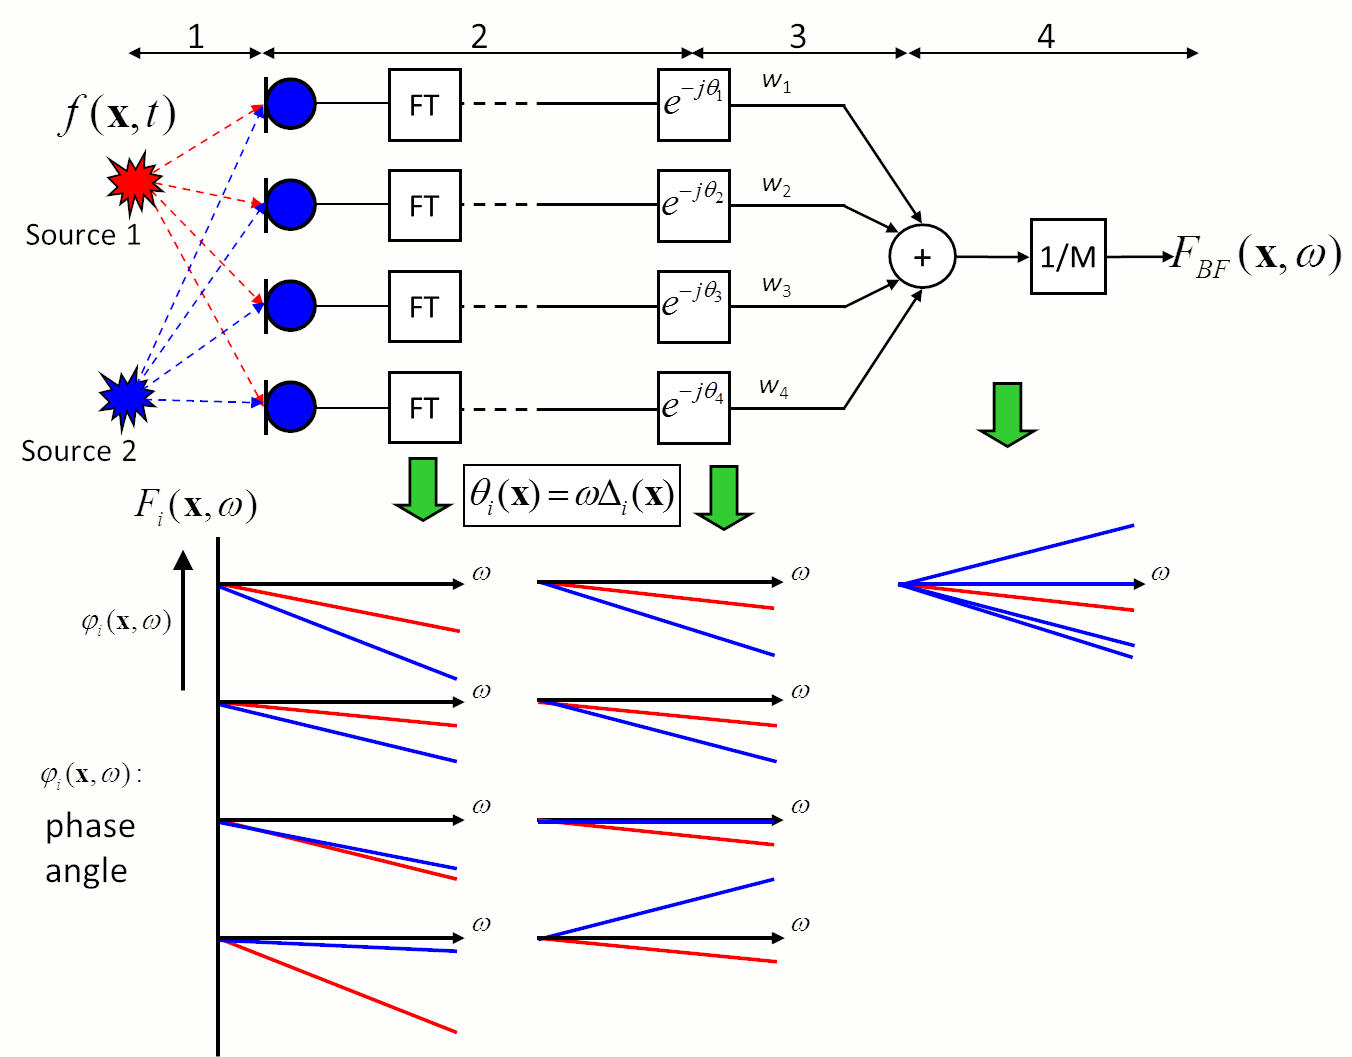 Fig. 1: Signal flow of delay-and-sum beamforming in the frequency domain